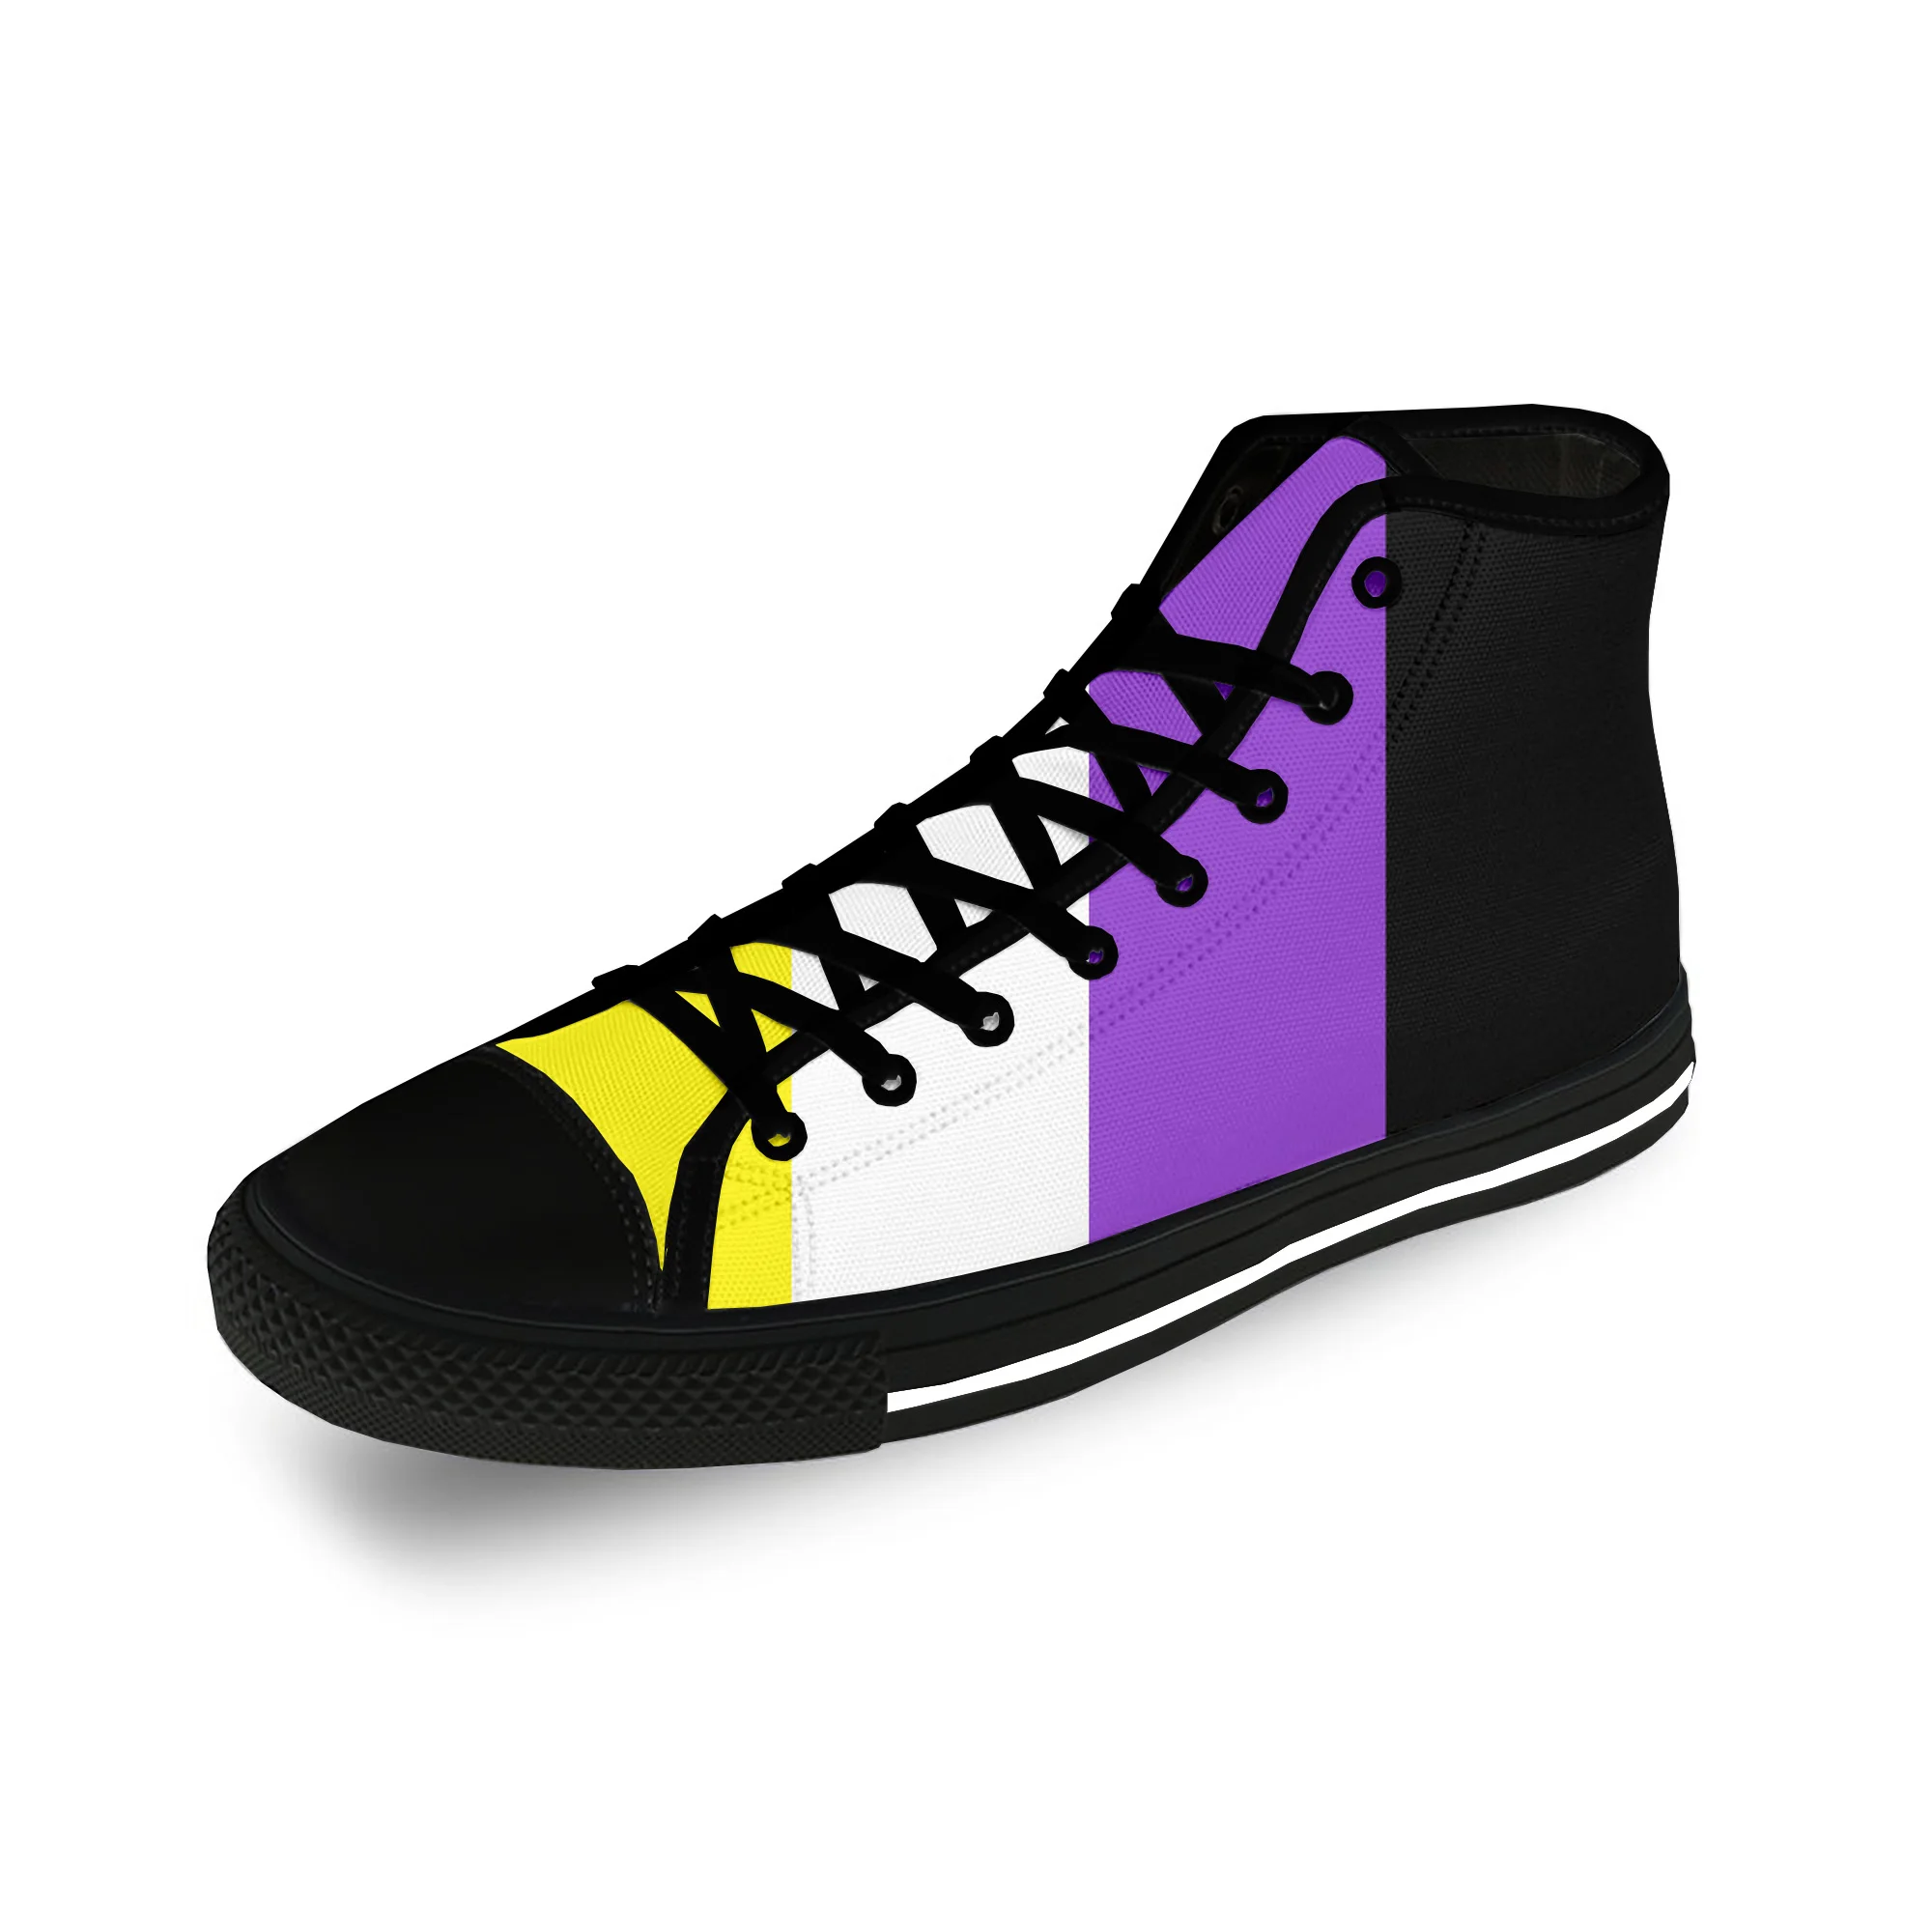 Non binary Flag Enby Pride Funny Casual Cloth Fashion 3D Print High Top Canvas Shoes Men Women Lightweight Breathable Sneakers